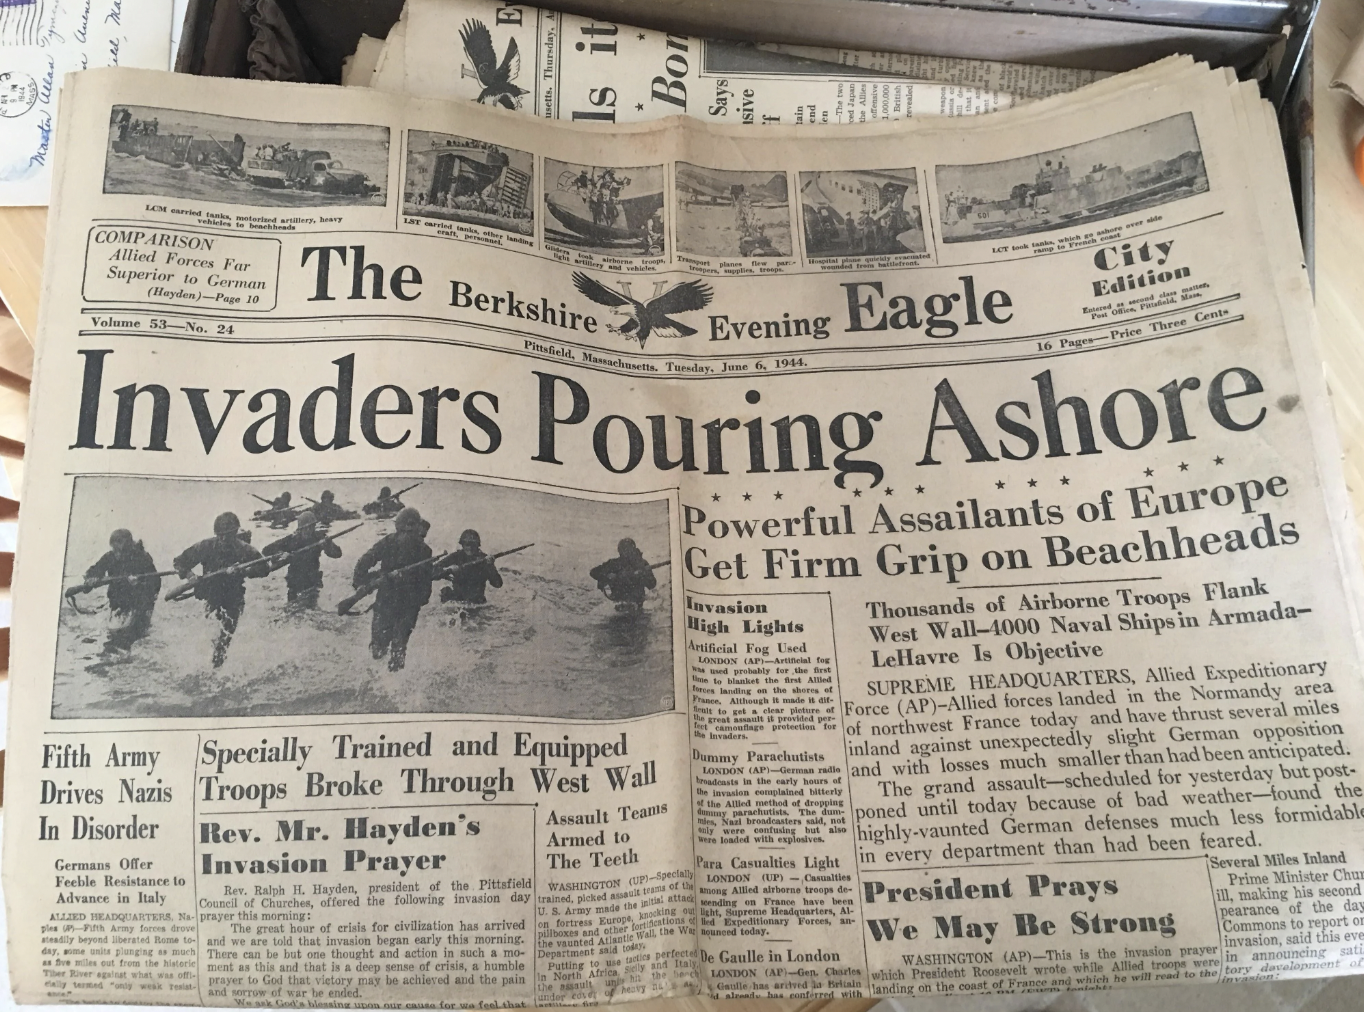 newsprint - Is it Bon Comparison Allied Forces Far Superior to German Volume 33No. 24 The Berkshire Evening Eagle Flow Mana Tamar, Jon 1946 City Edition 16 PPrice These Cats Invaders Ashore. Fifth Army Drives Nazis In Disorder Gera Ofer Feeble Resistance 